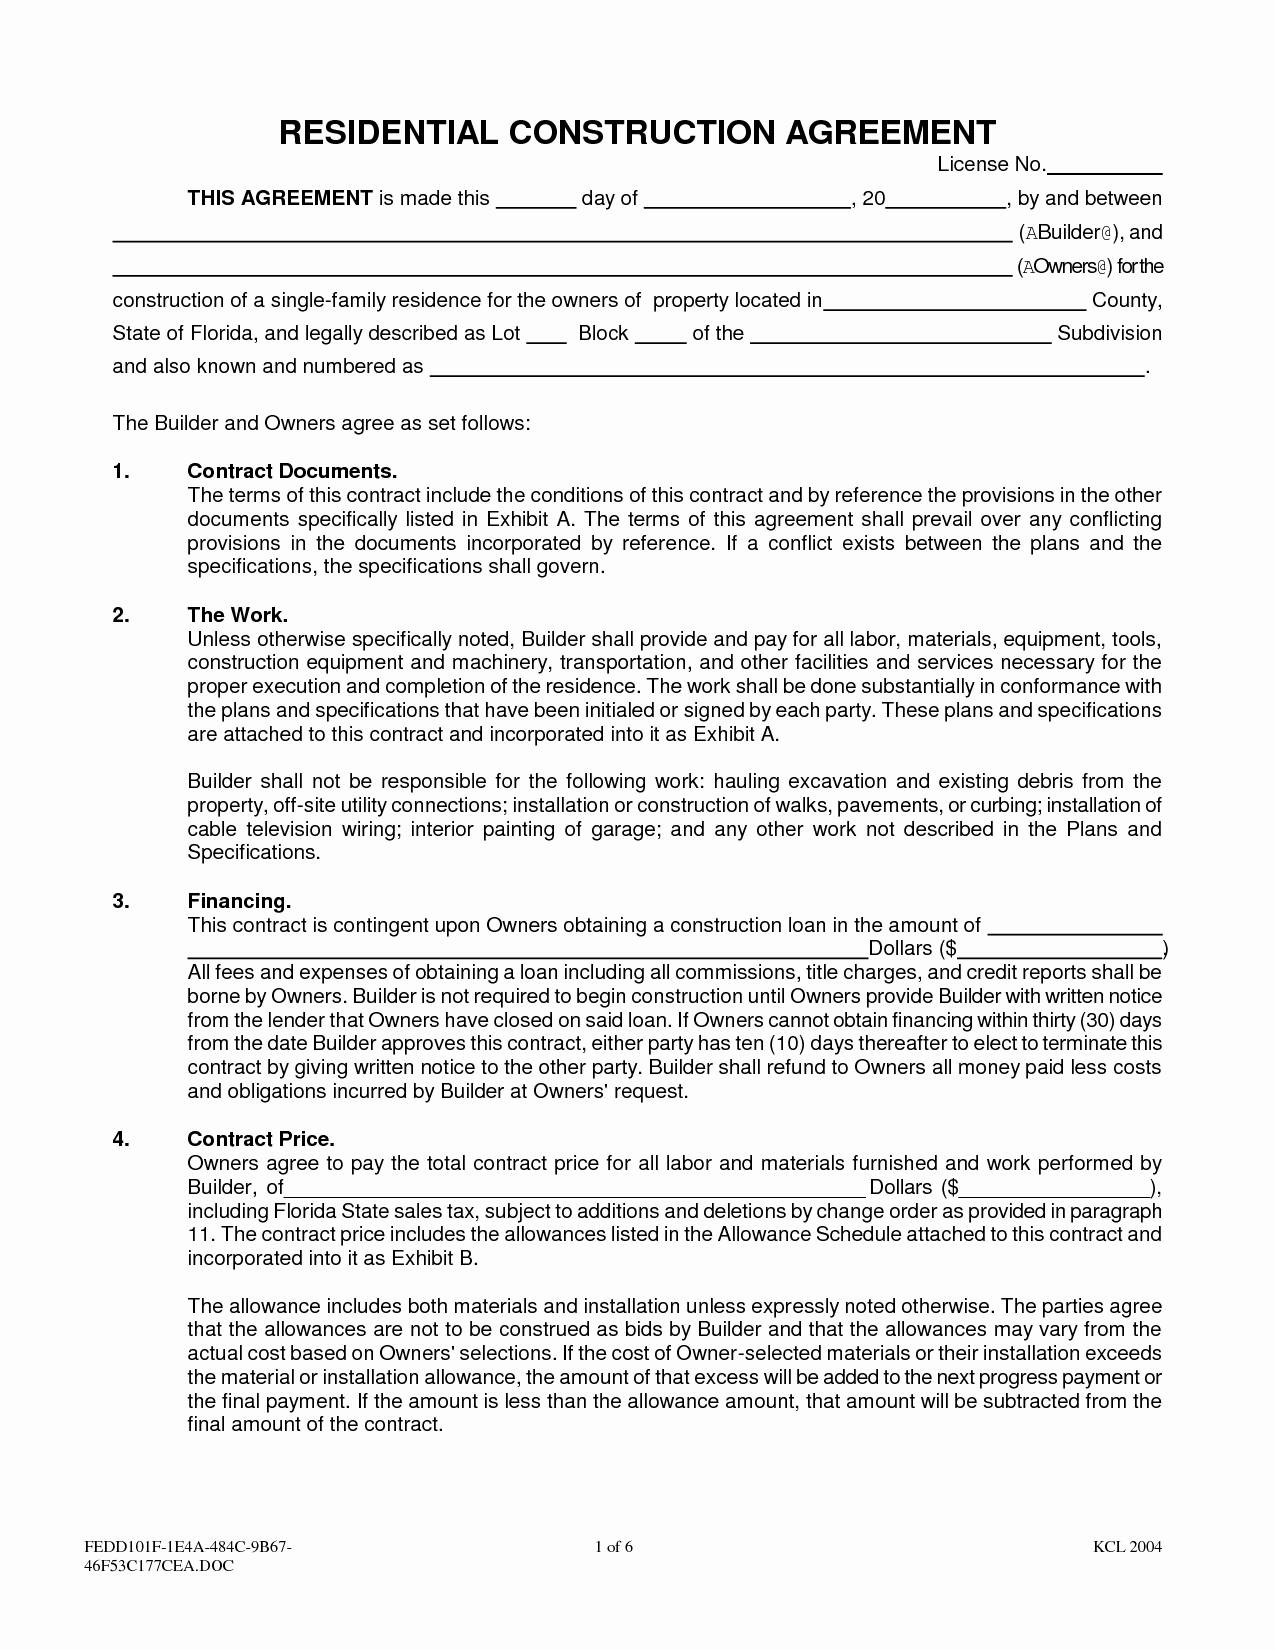 Interior Design Letter Of Agreement Template - Landscaping Scope Work Template Fresh Contract Interior Design